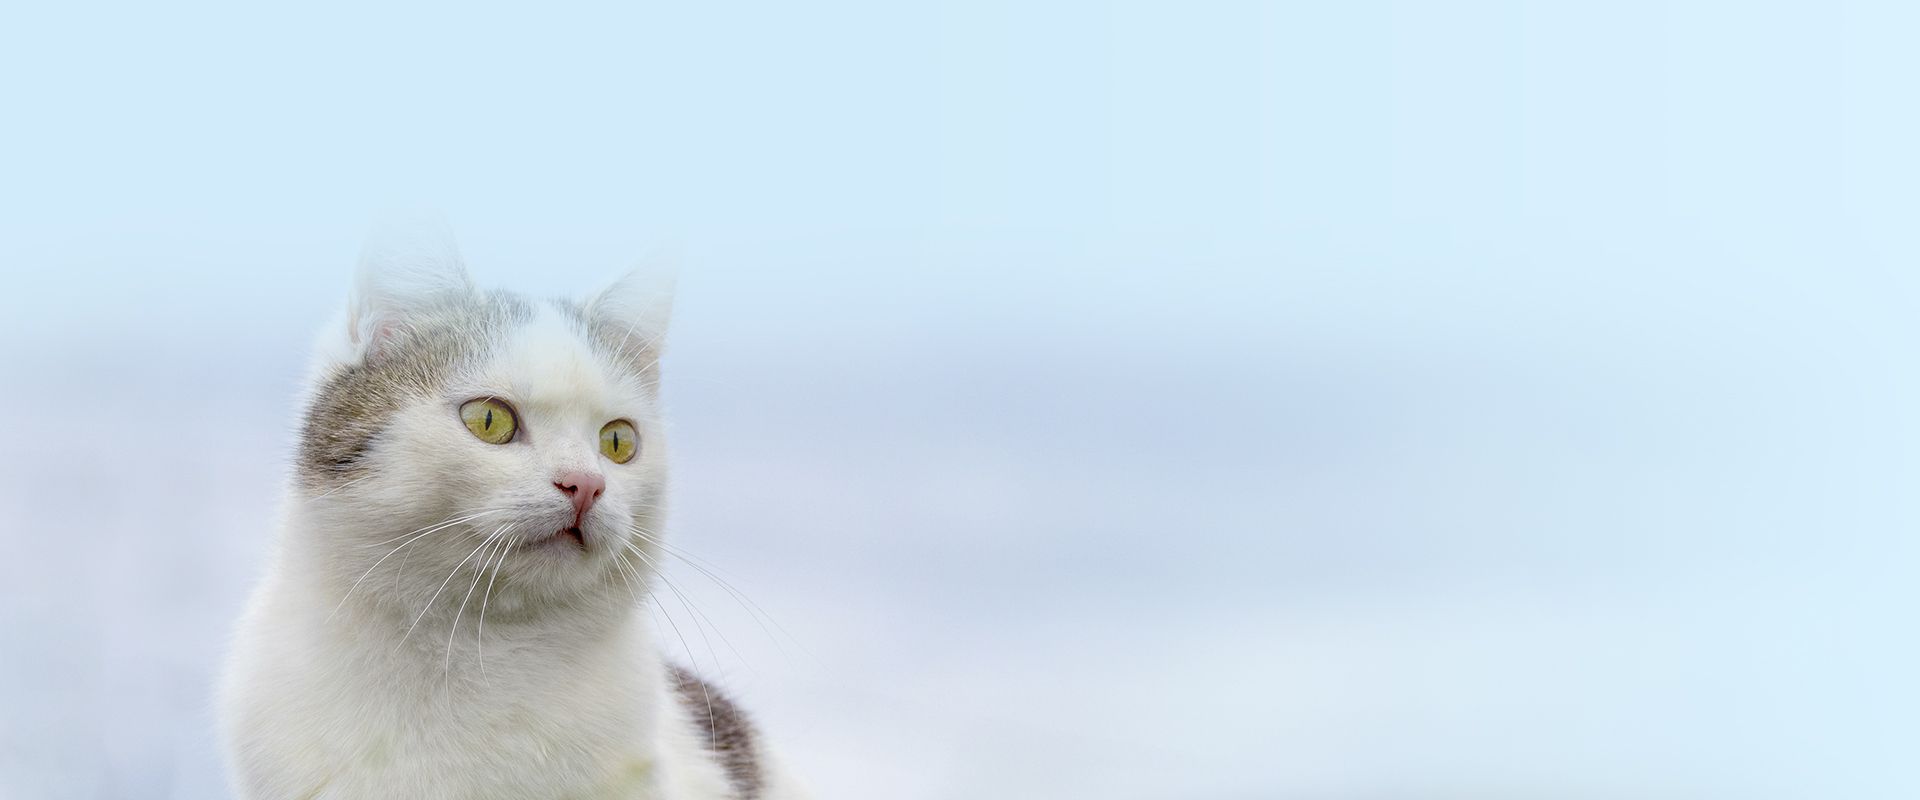 white spotted cat with green eyes sitting on the grass on a background of blue sky